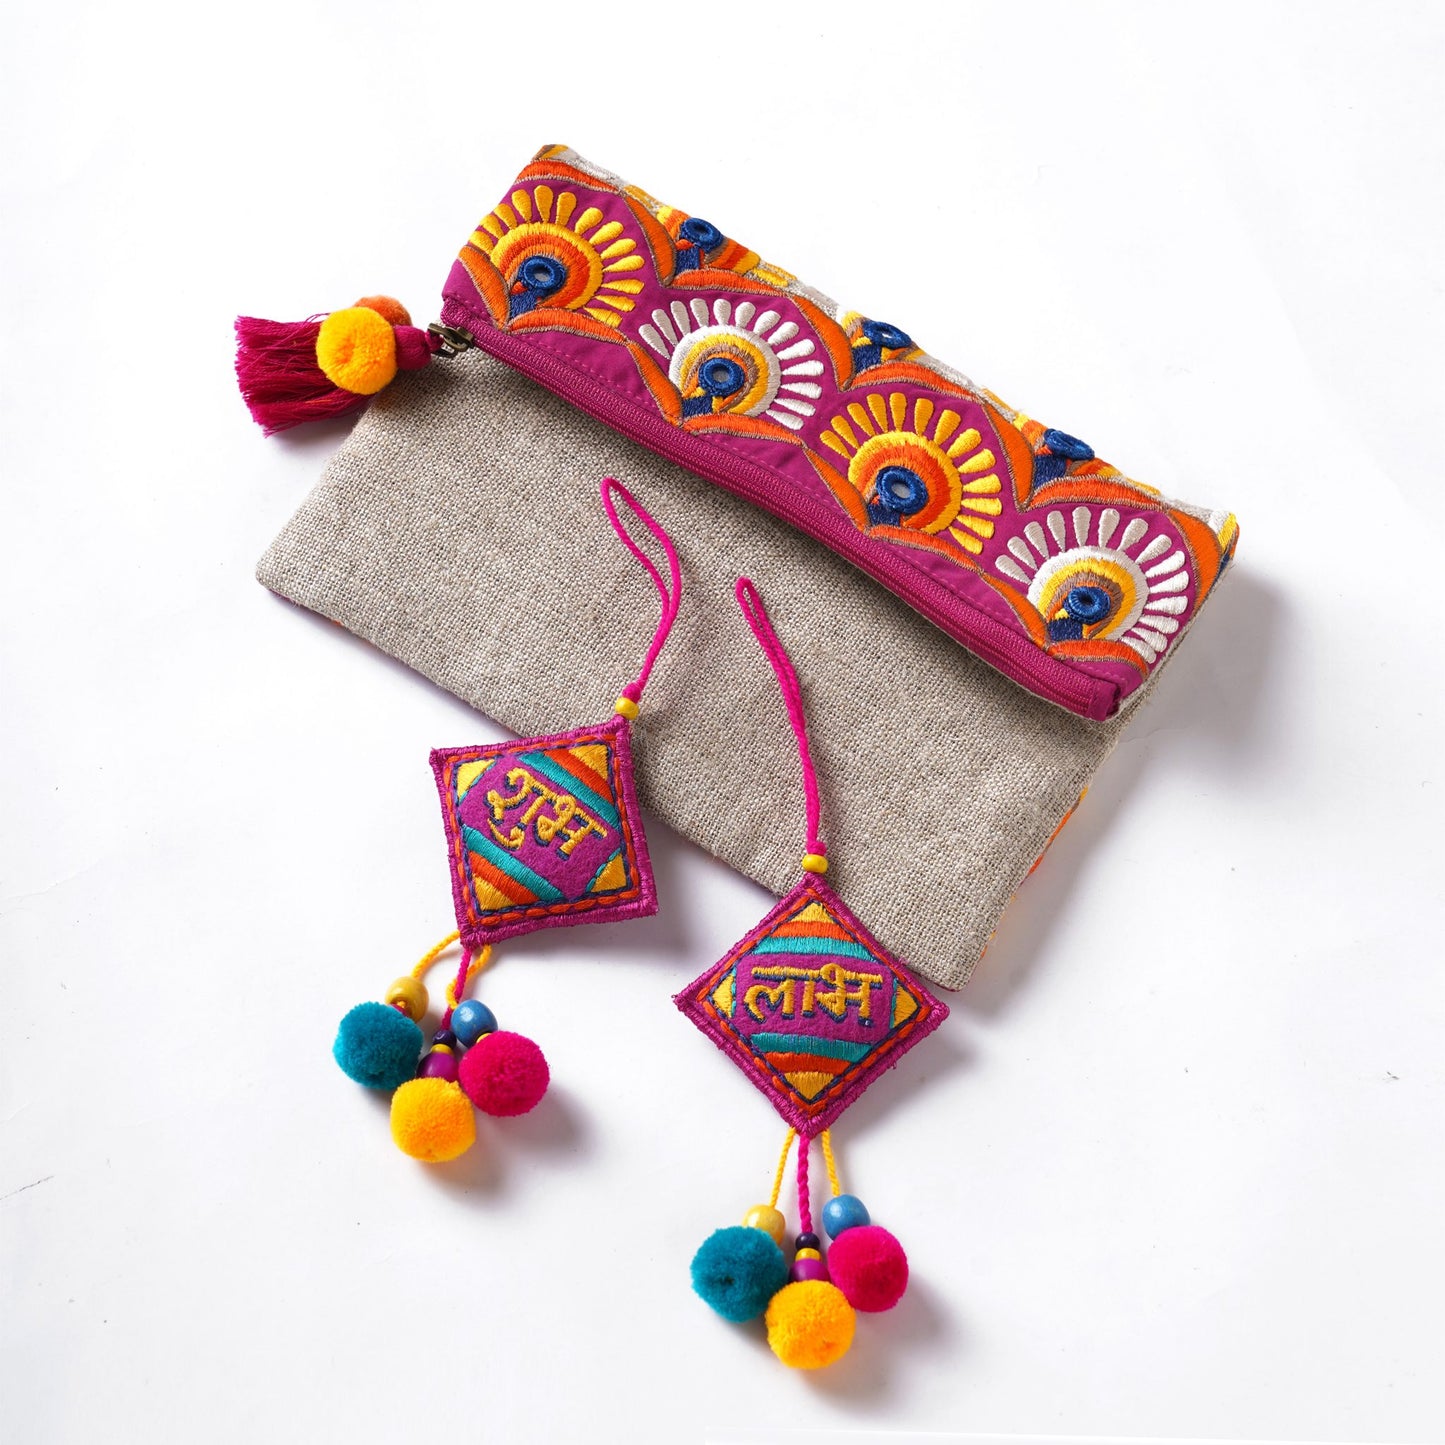 DIWALI GIFT PACK - Embroidered Linen foldover clutch with pair of SHUBH-LABH tassels